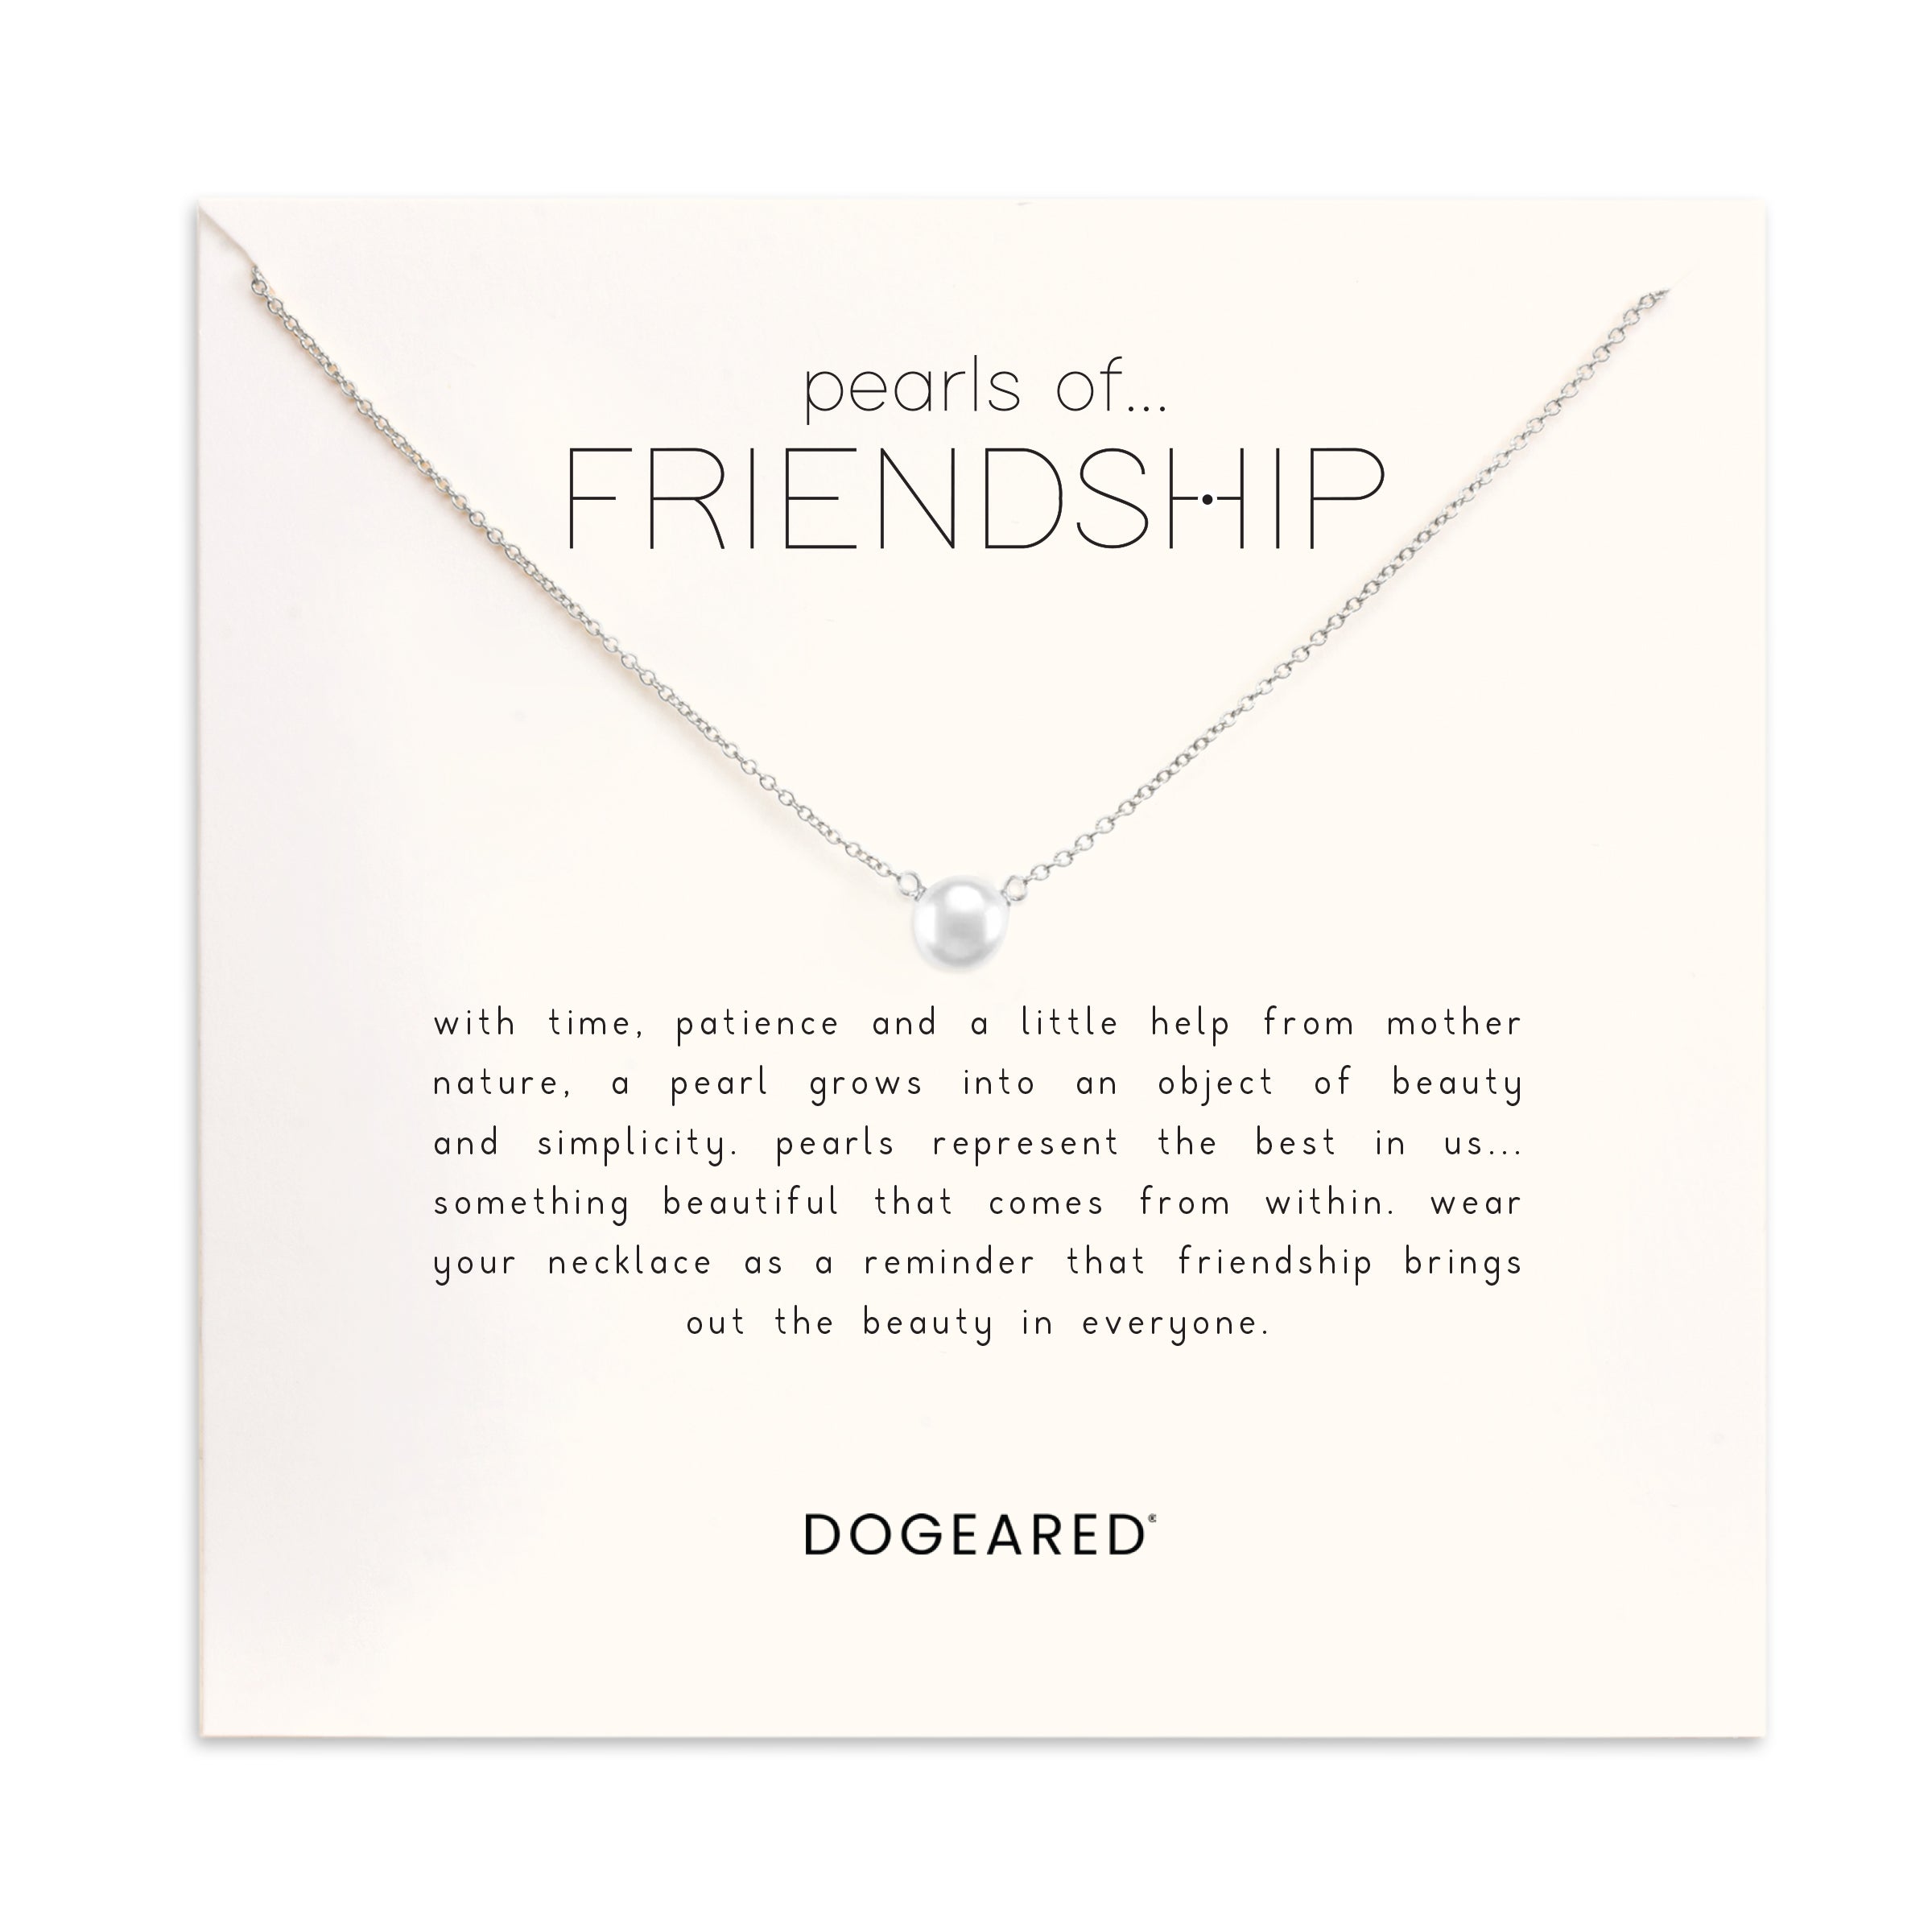 Pearls of friendship small white pearl necklace - Dogeared